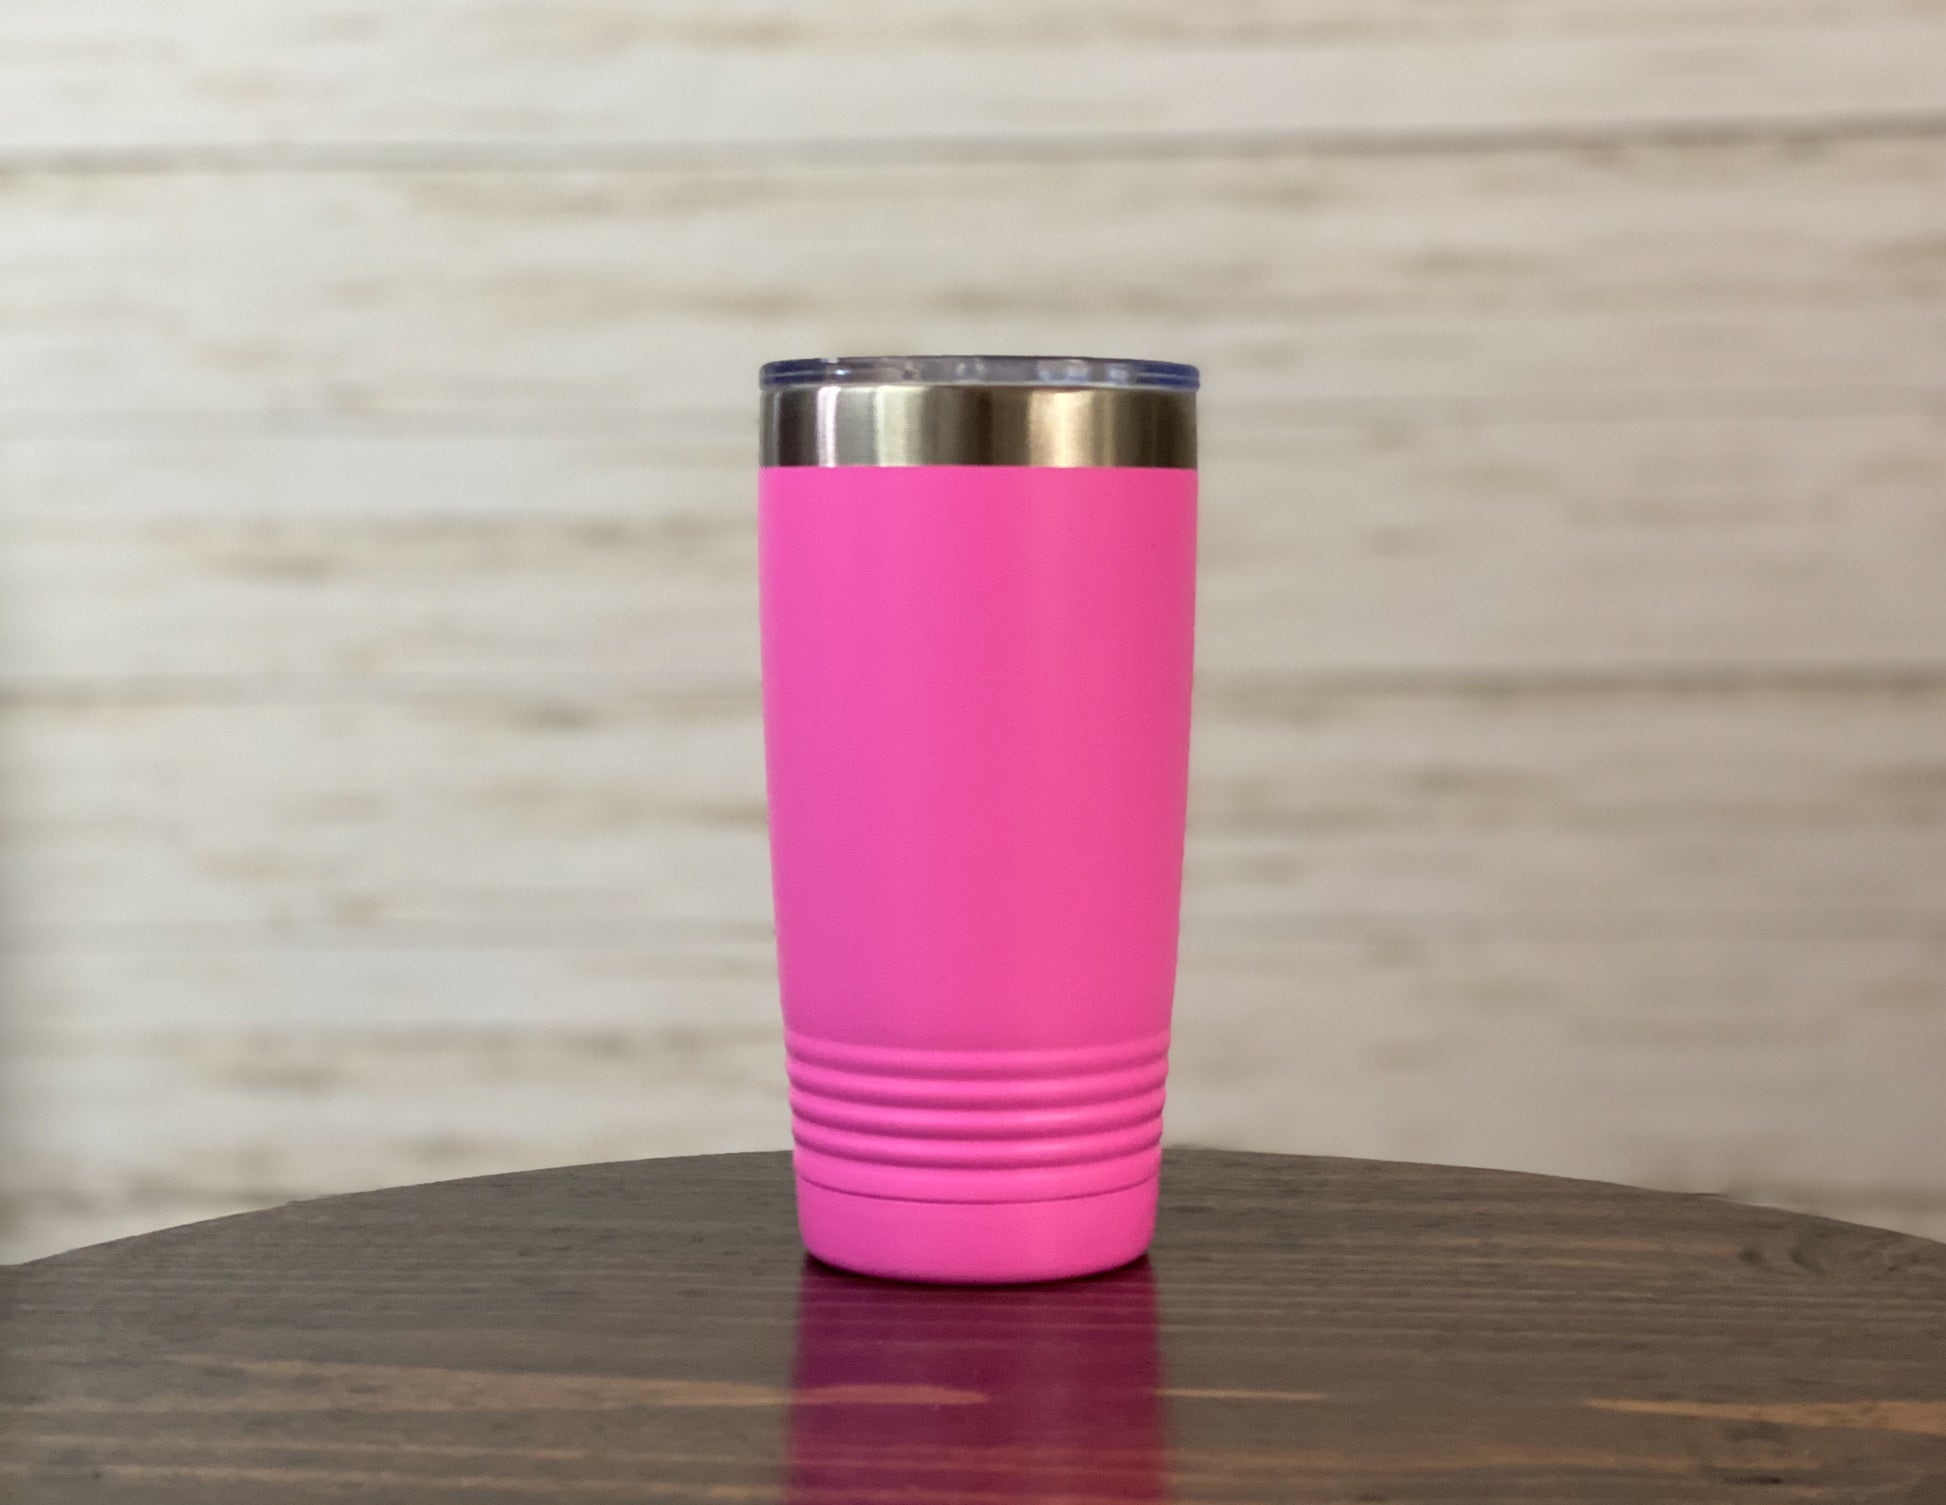 18.5oz. White Stainless Steel Tumbler by Celebrate It